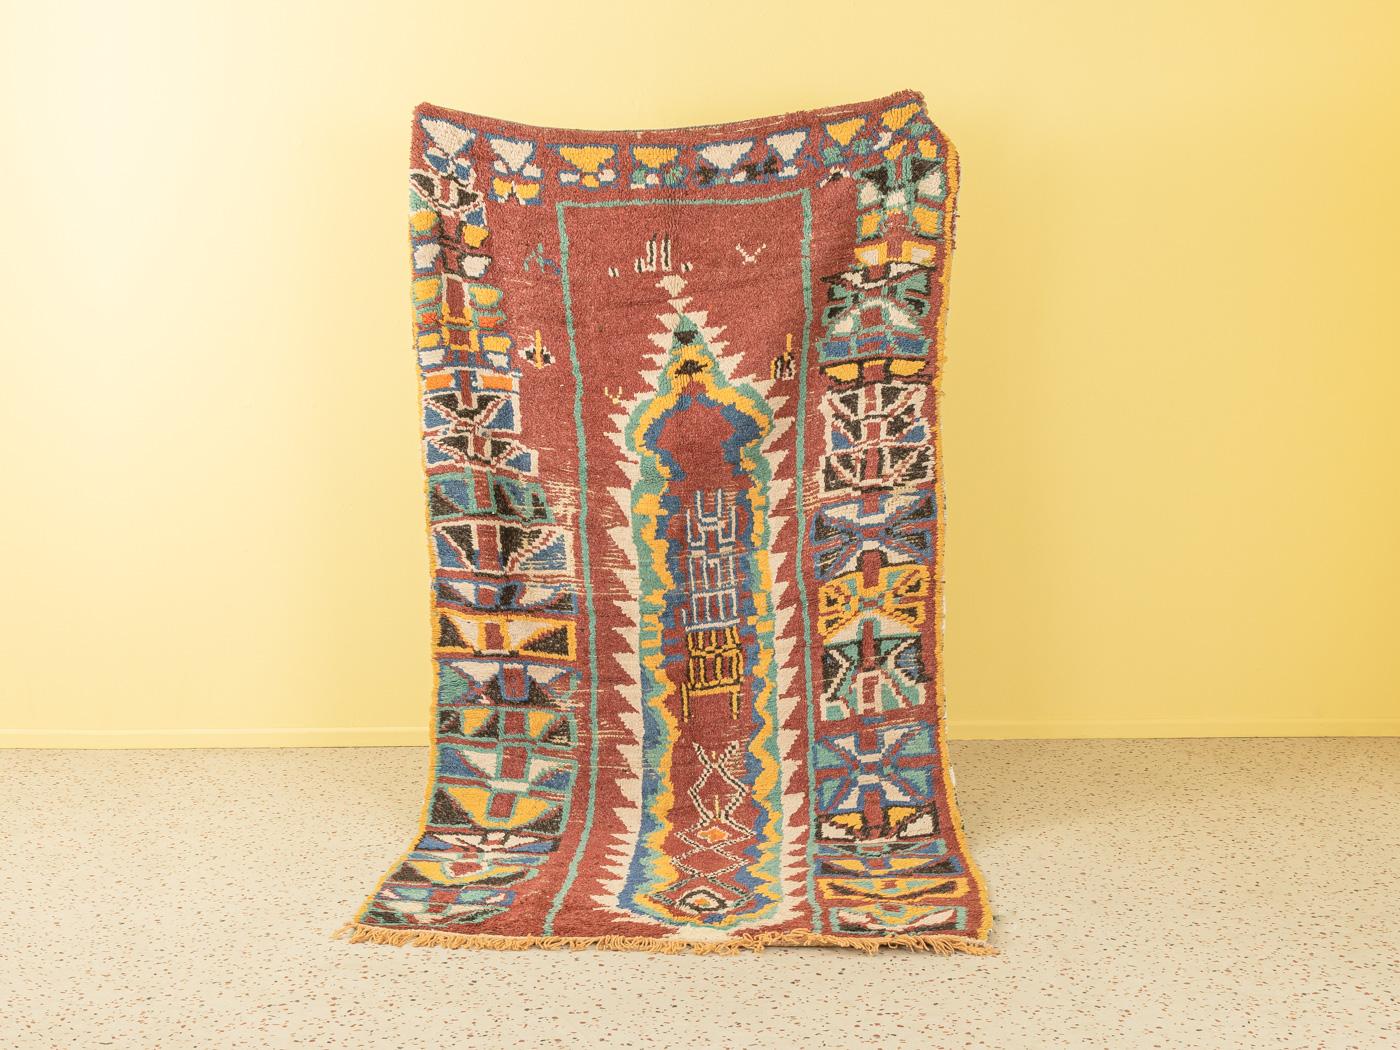 This Azilal is a 100 % vintage wool rug – thick and soft, comfortable underfoot. Our Berber rugs are handmade, one knot at a time. Each of our Berber rugs is a long-lasting one-of-a-kind piece, created in a sustainable manner with local